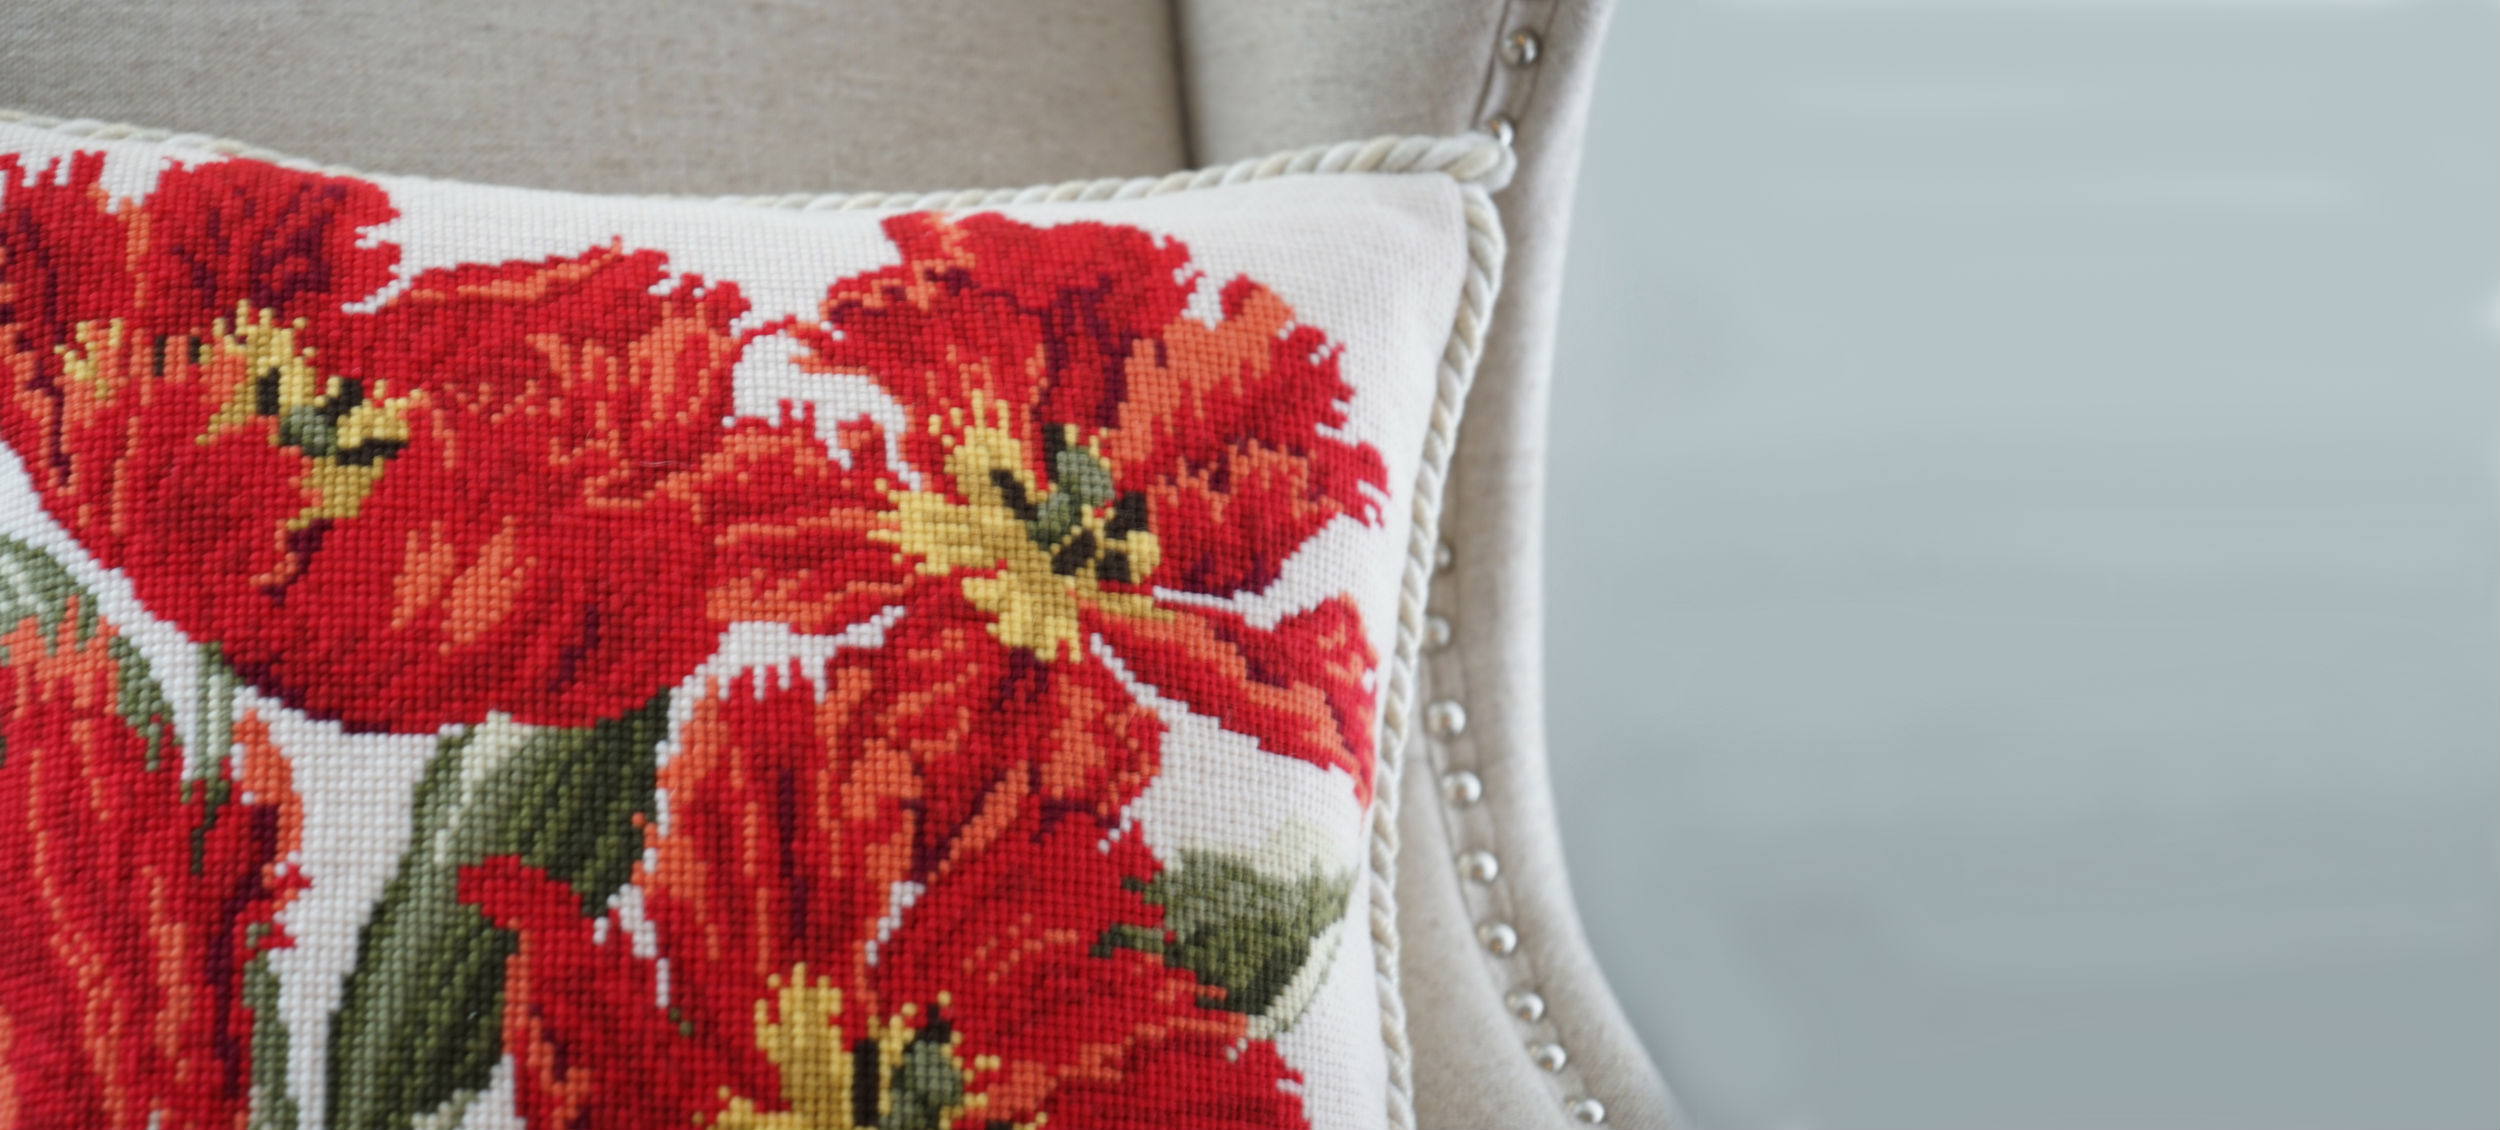 Finished Needlepoint Pillows — QUEENS GATE DESIGN